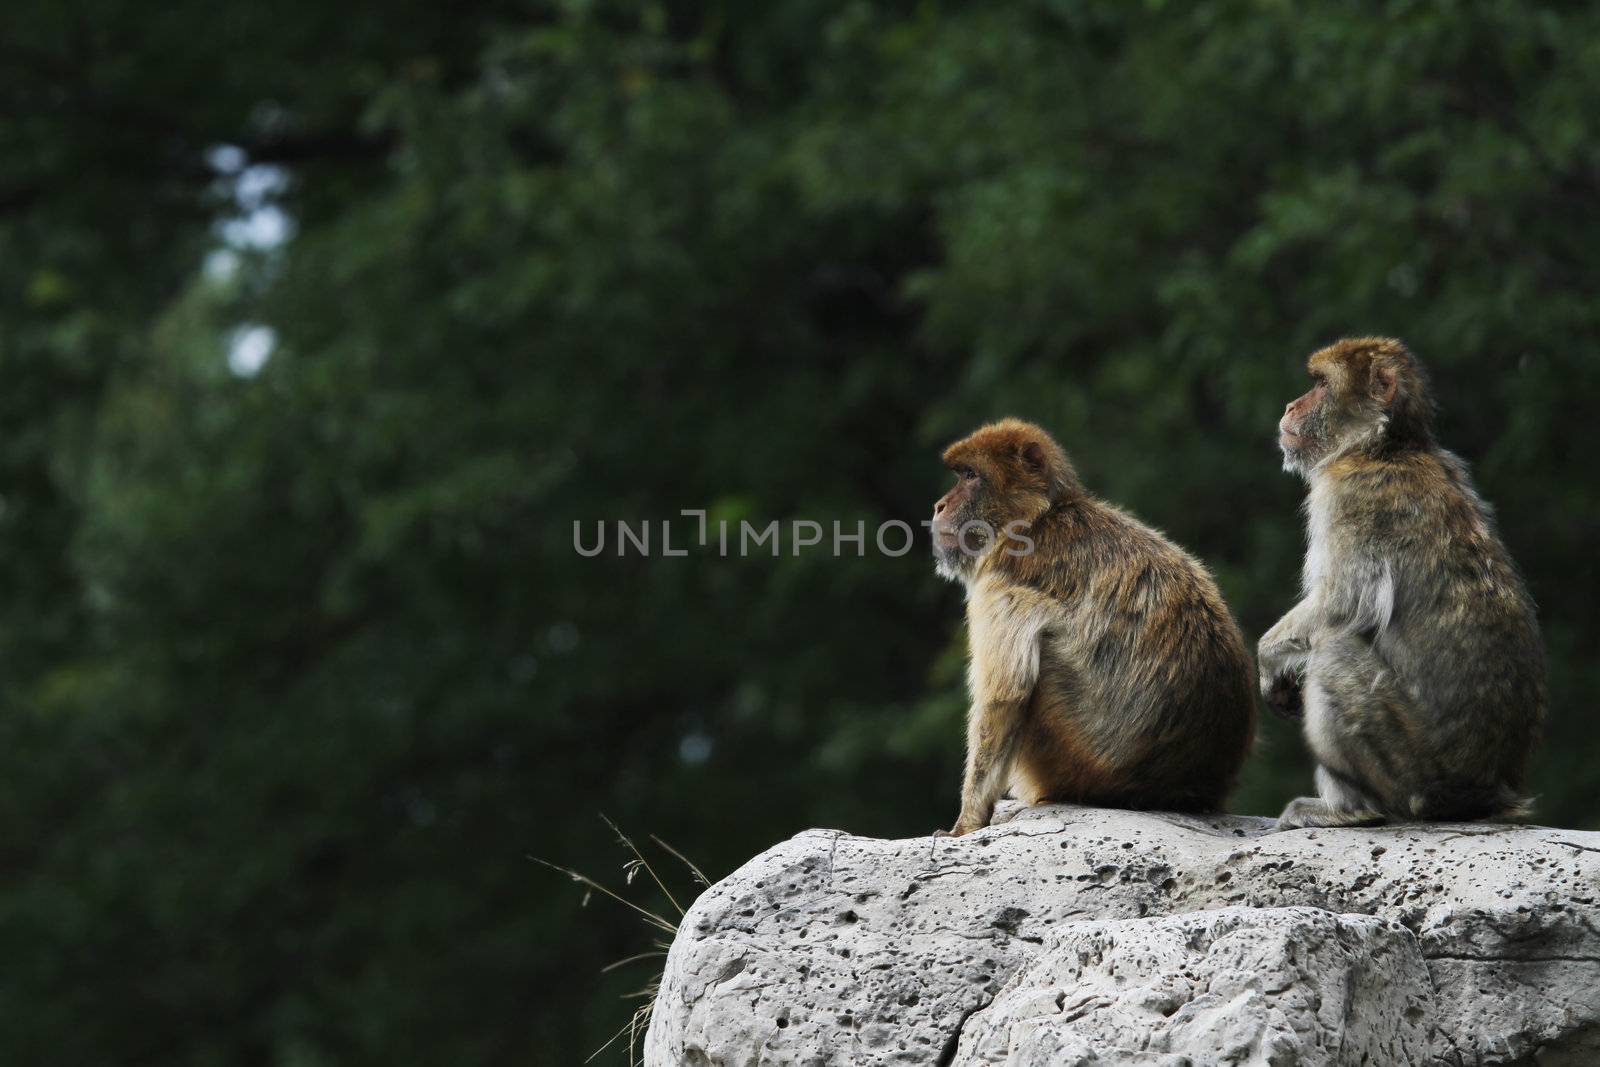 Two Barbary Macaques (Macaca sylvanus) look out in the distance on a cliff.